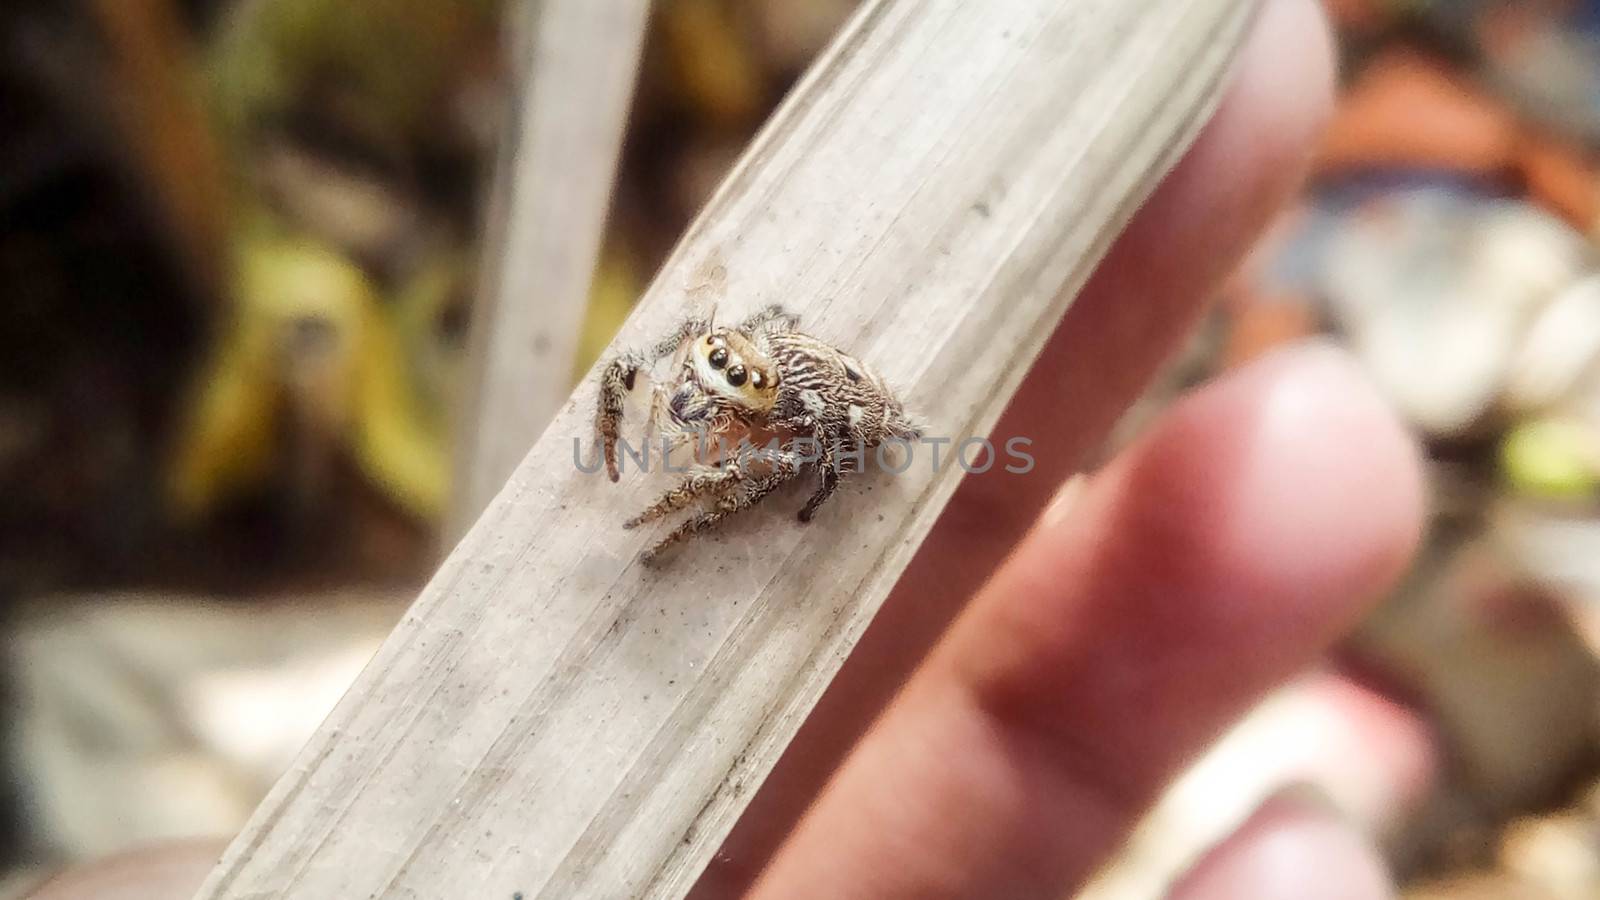 looking beautiful spider on hand with a leaf by jahidul2358